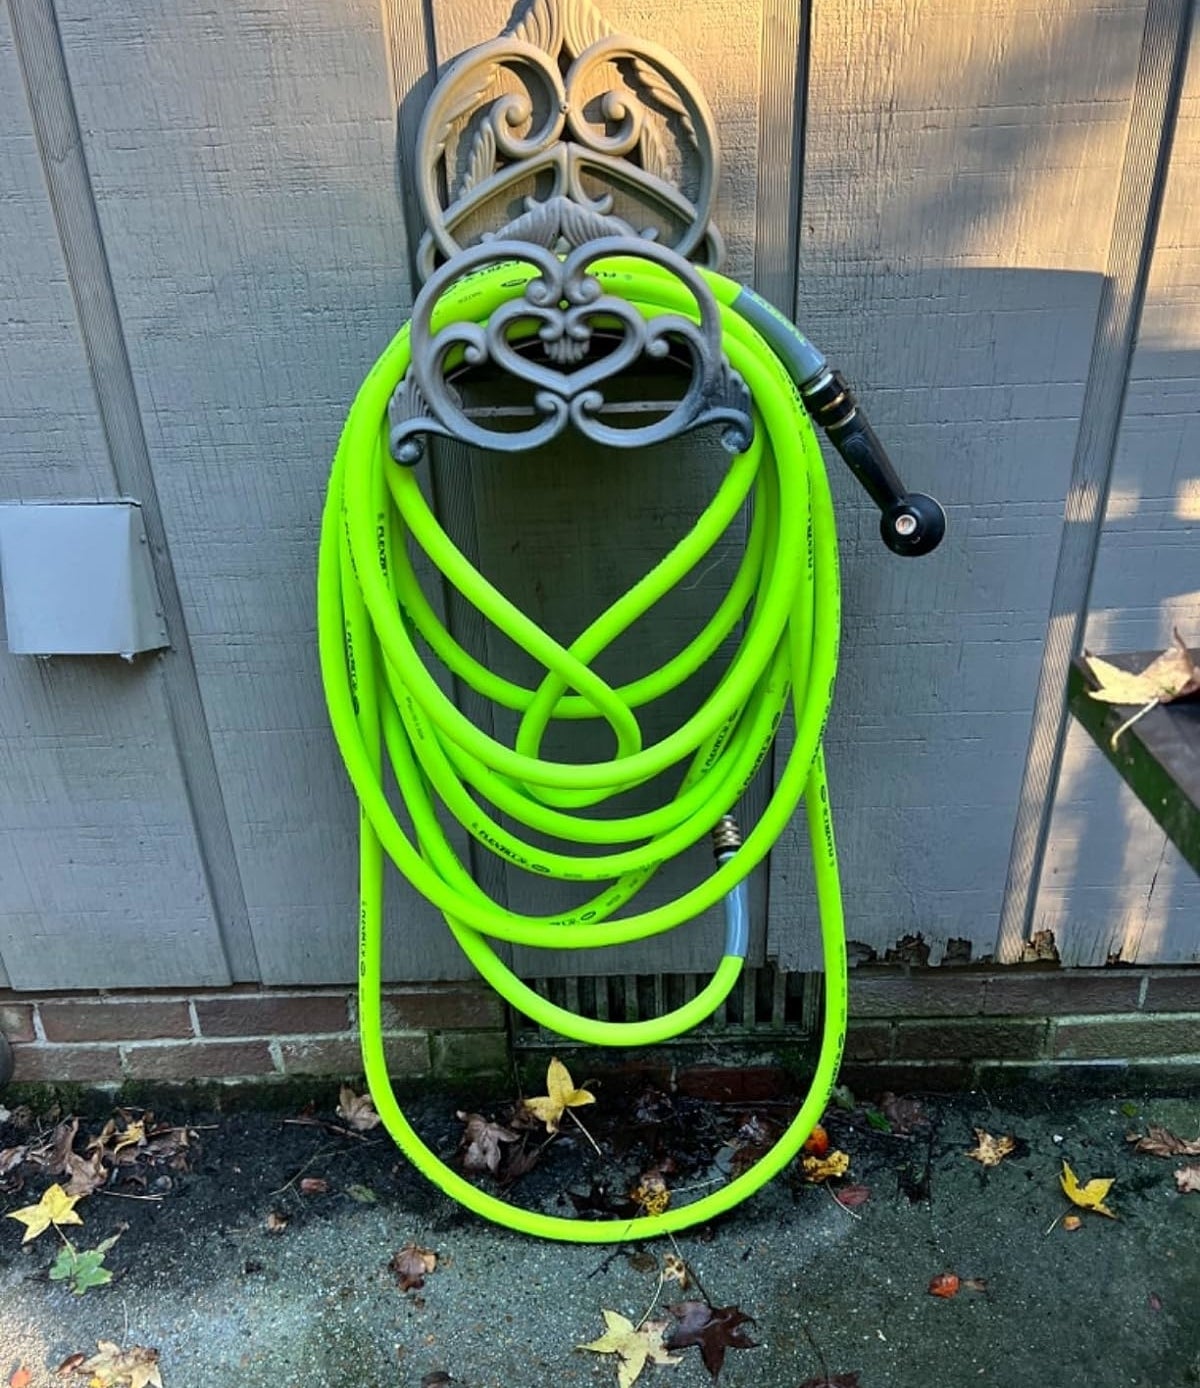 A green garden hose coiled around a decorative wall-mounted holder with fallen leaves on the ground